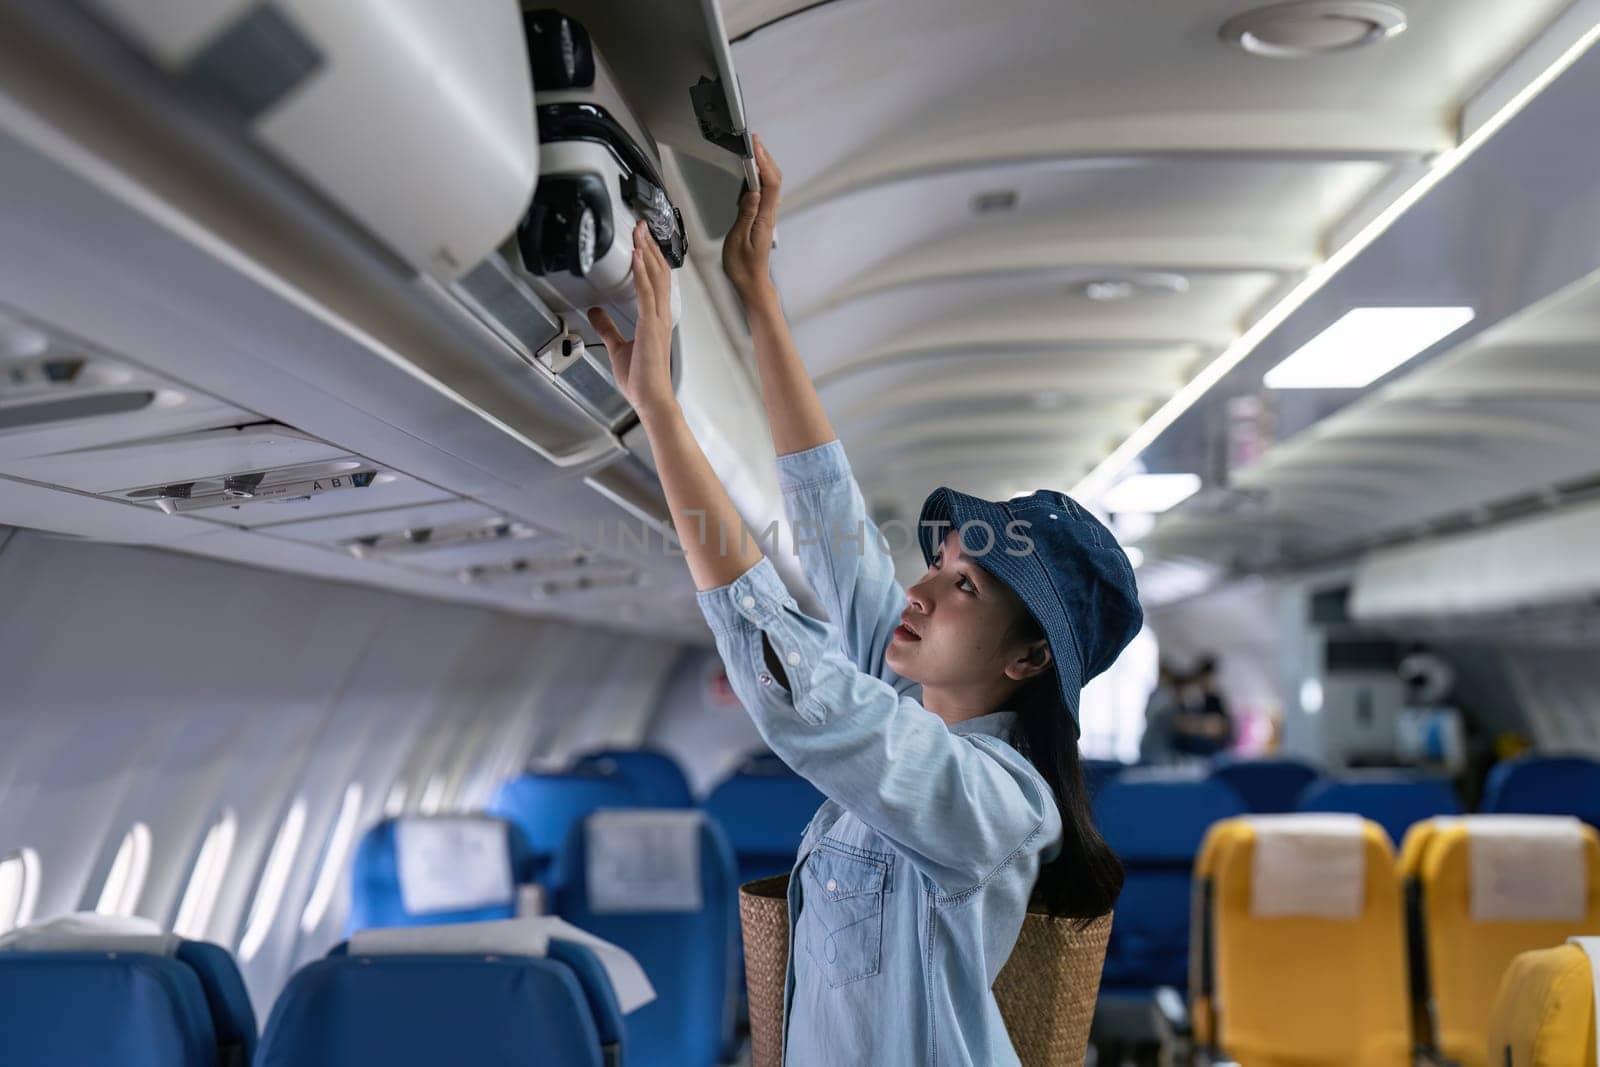 Young woman putting luggage into overhead locker on airplane. Traveler placing carry on bag in overhead compartment in aircraft by itchaznong